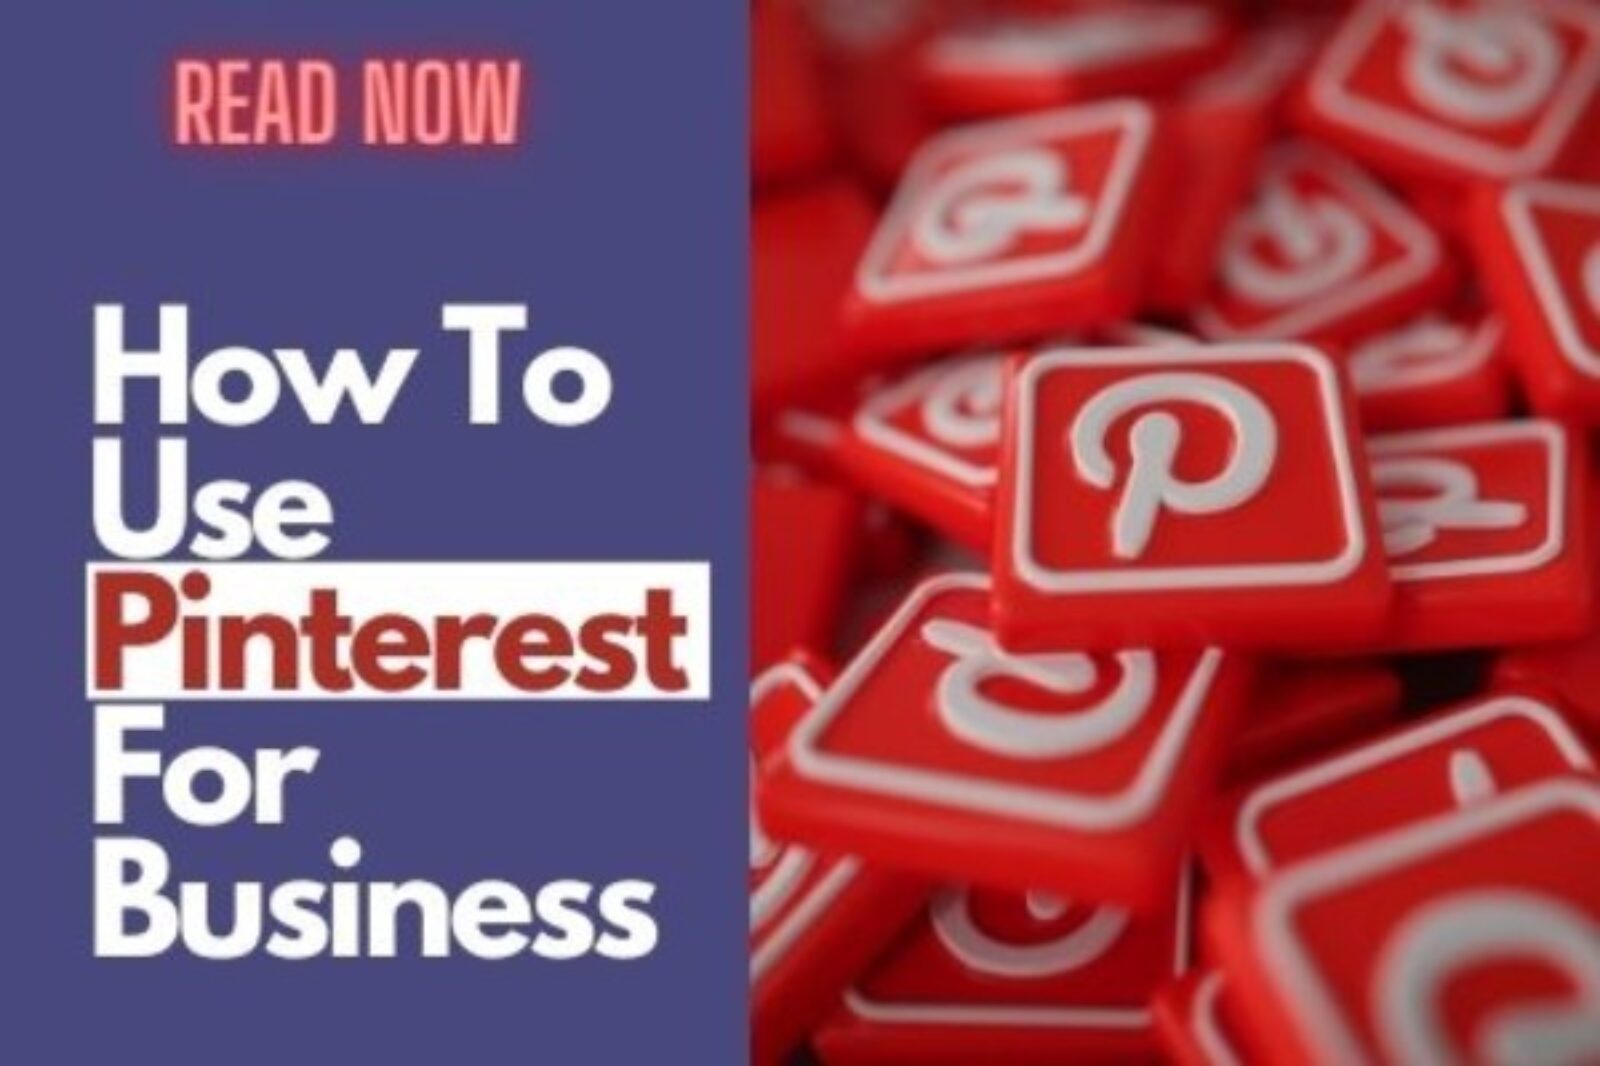 How To Use Pinterest For Business That Could Drive More Traffic